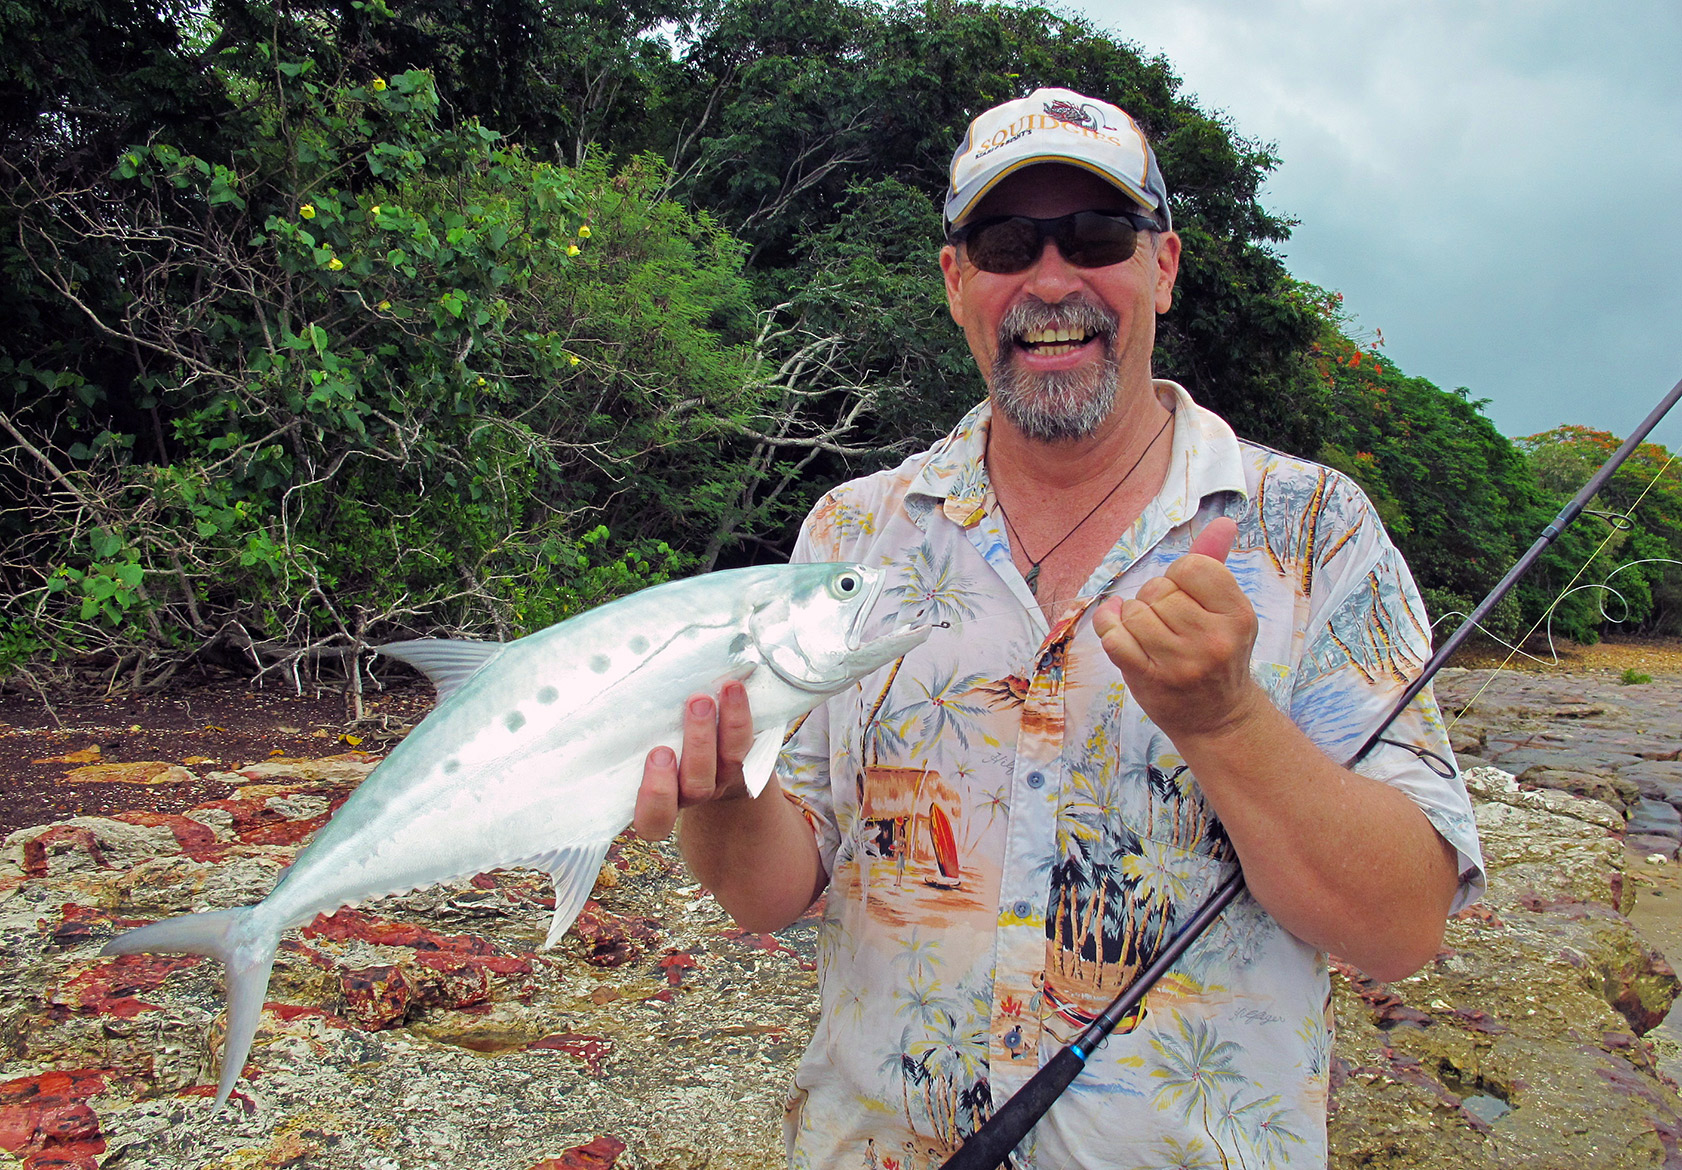 Small queenfish (shown here) and trevally can be quite common catches from the shore at times, especially in the dry season. Bigger models also show up at times.